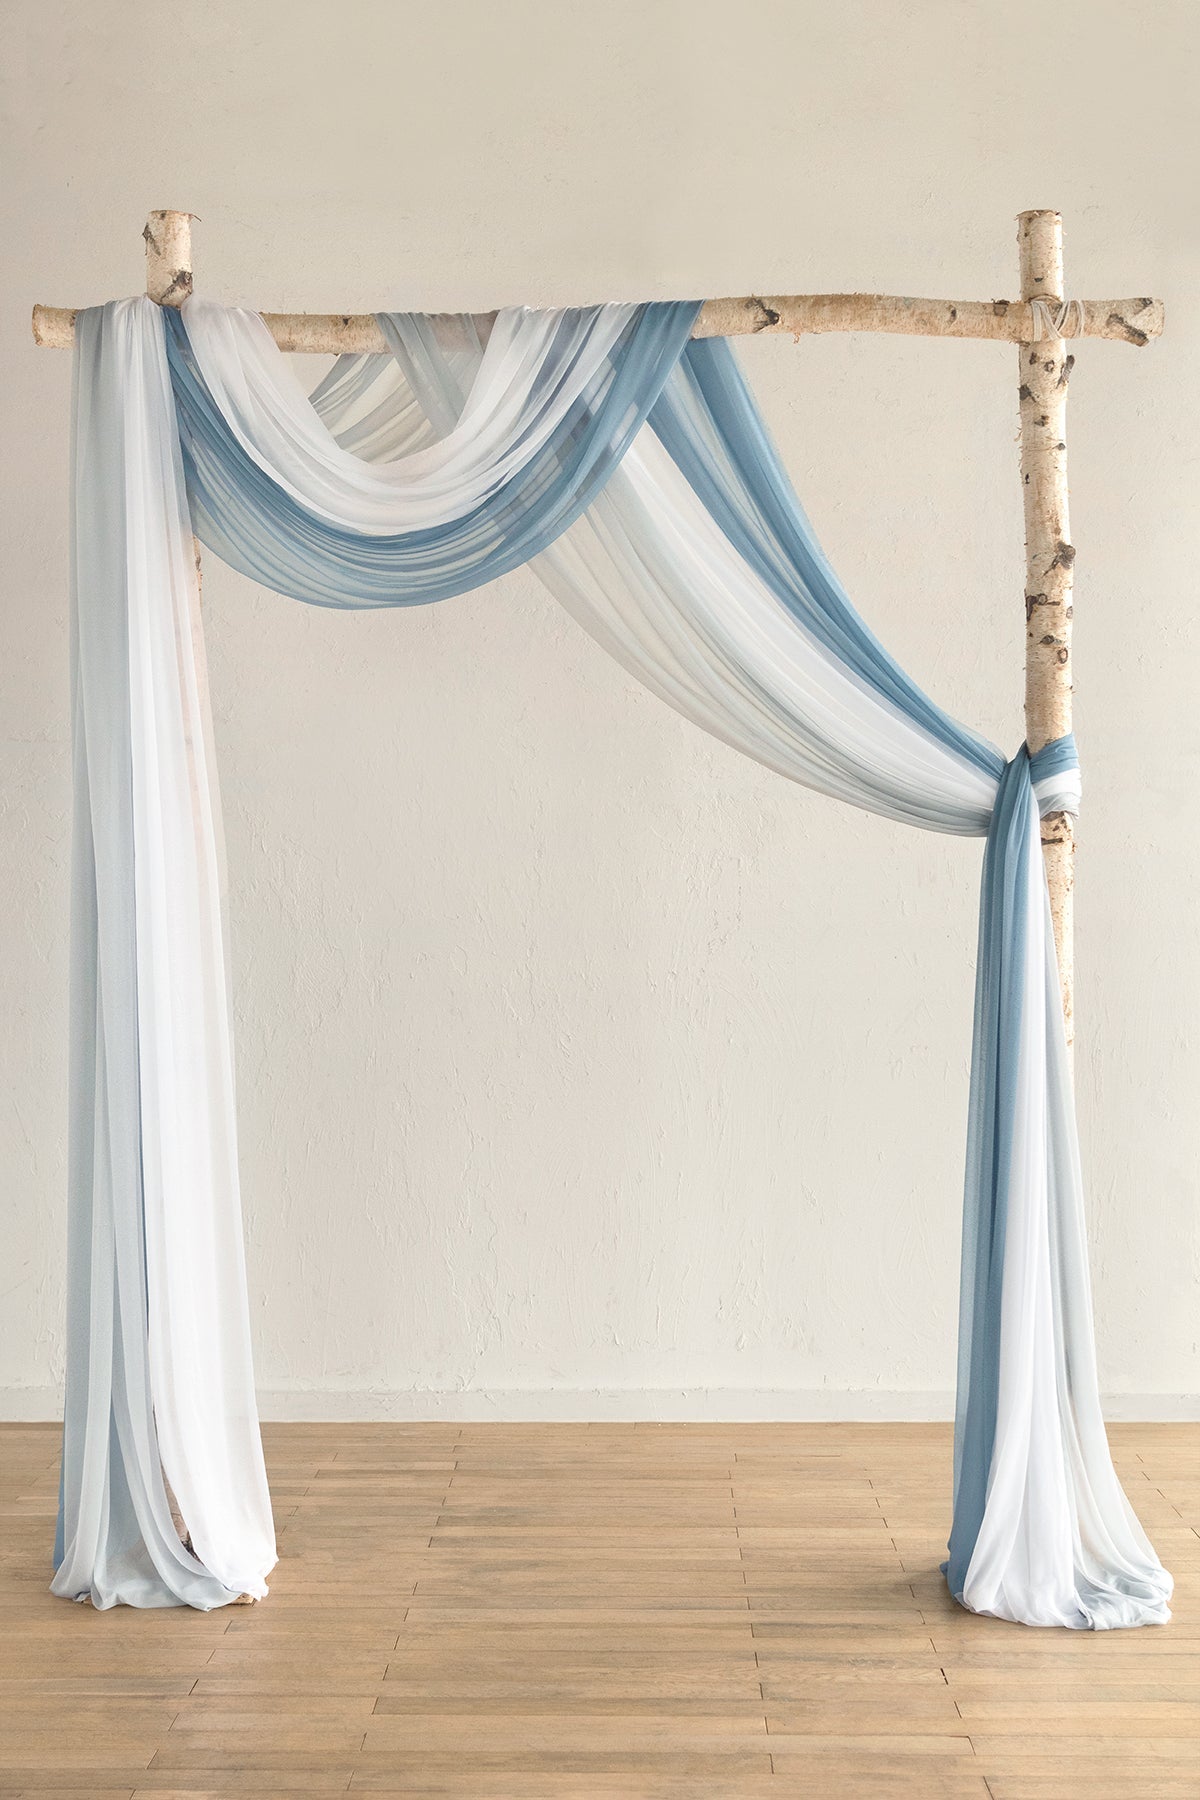 Wedding Arch Drapes in Shades of Blue | Clearance